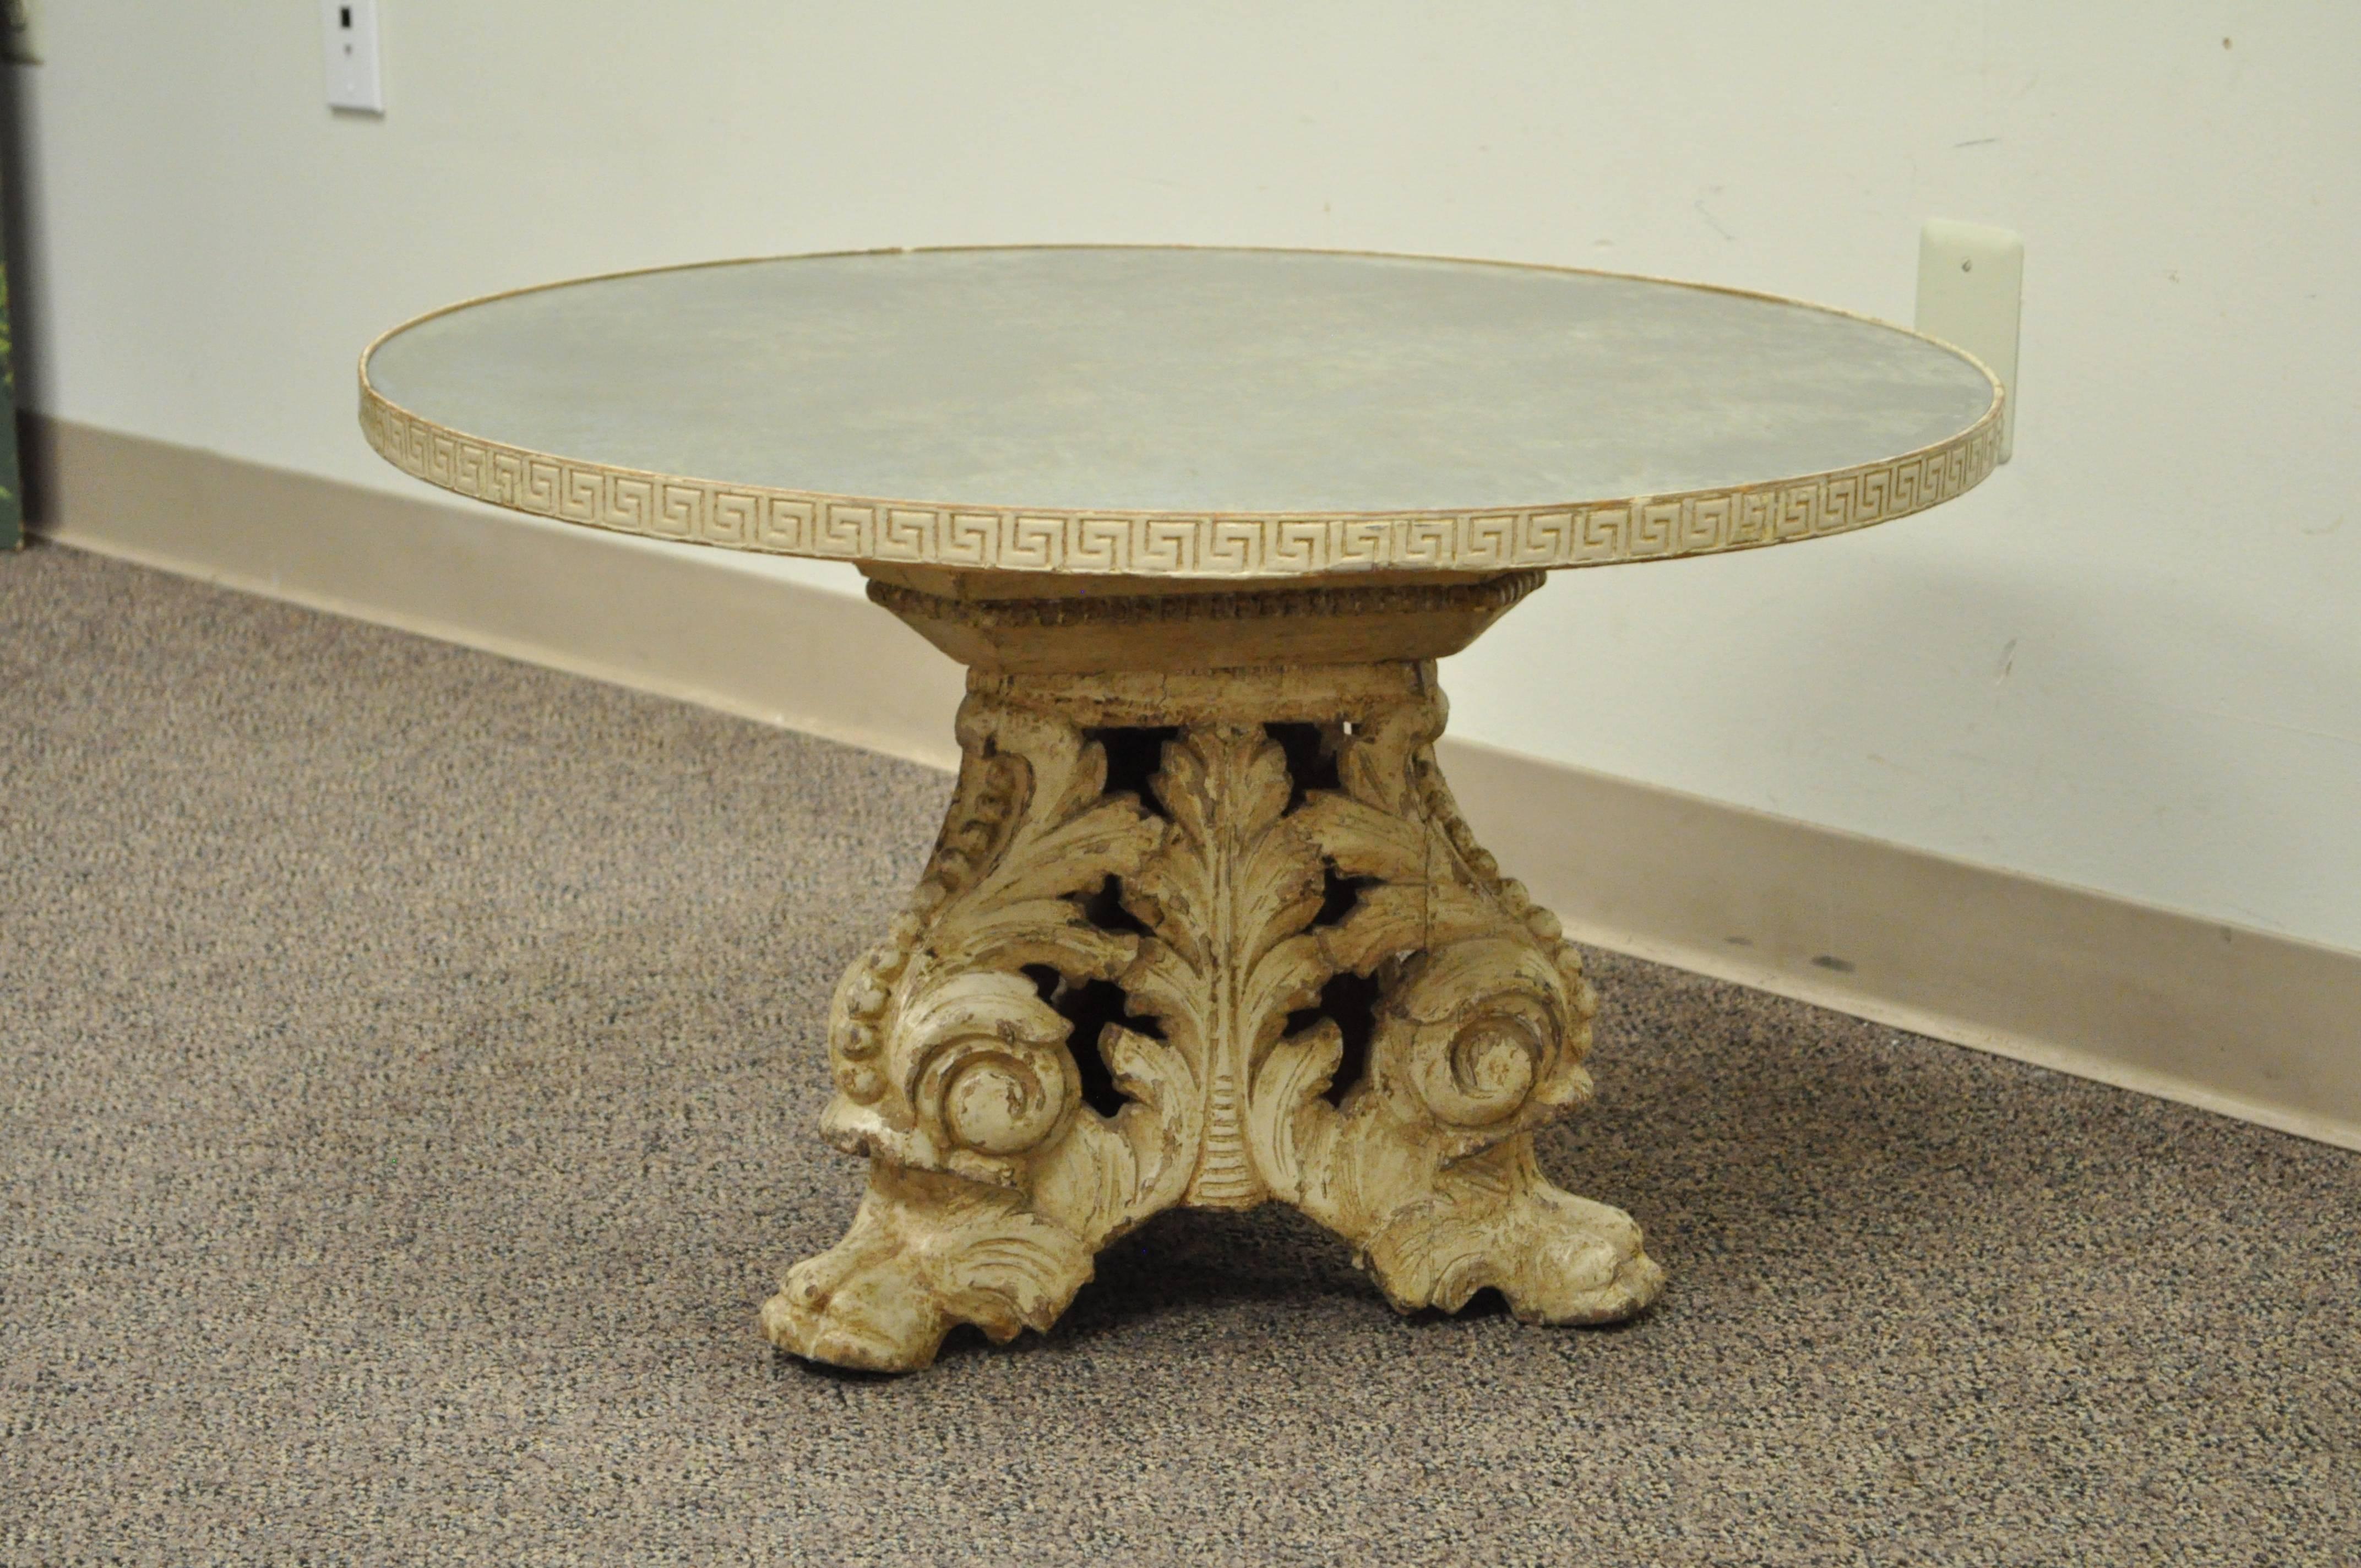 Antique Italian Baroque style round coffee table. Item features an églomisé distressed glass top, carved Greek key banding, solid hand-carved wood acanthus and paw foot pedestal base, and a desirable cream distress painted finish. The base is